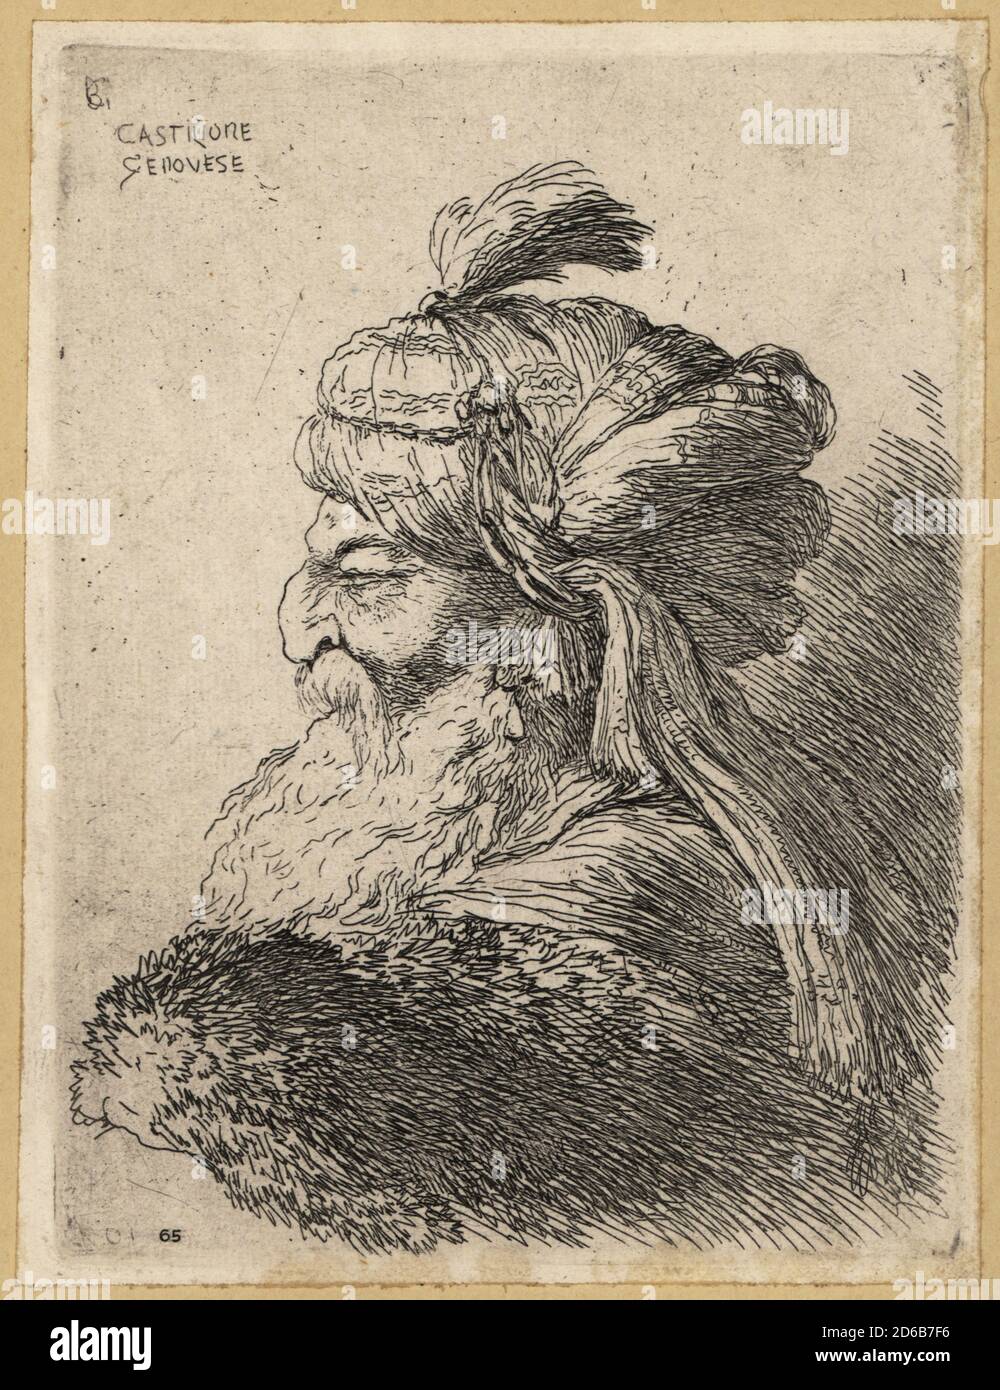 Bust of an old man with beard wearing a turban, in profile, 17th century. After an etching by Giovanni Benedetto Castiglione in his Heads in Oriental Headdress, 1648-50. Copperplate engraving by David Deuchar from A Collection of Etchings after the most Eminent Masters of the Dutch and Flemish Schools, Edinburgh, 1803. Stock Photo